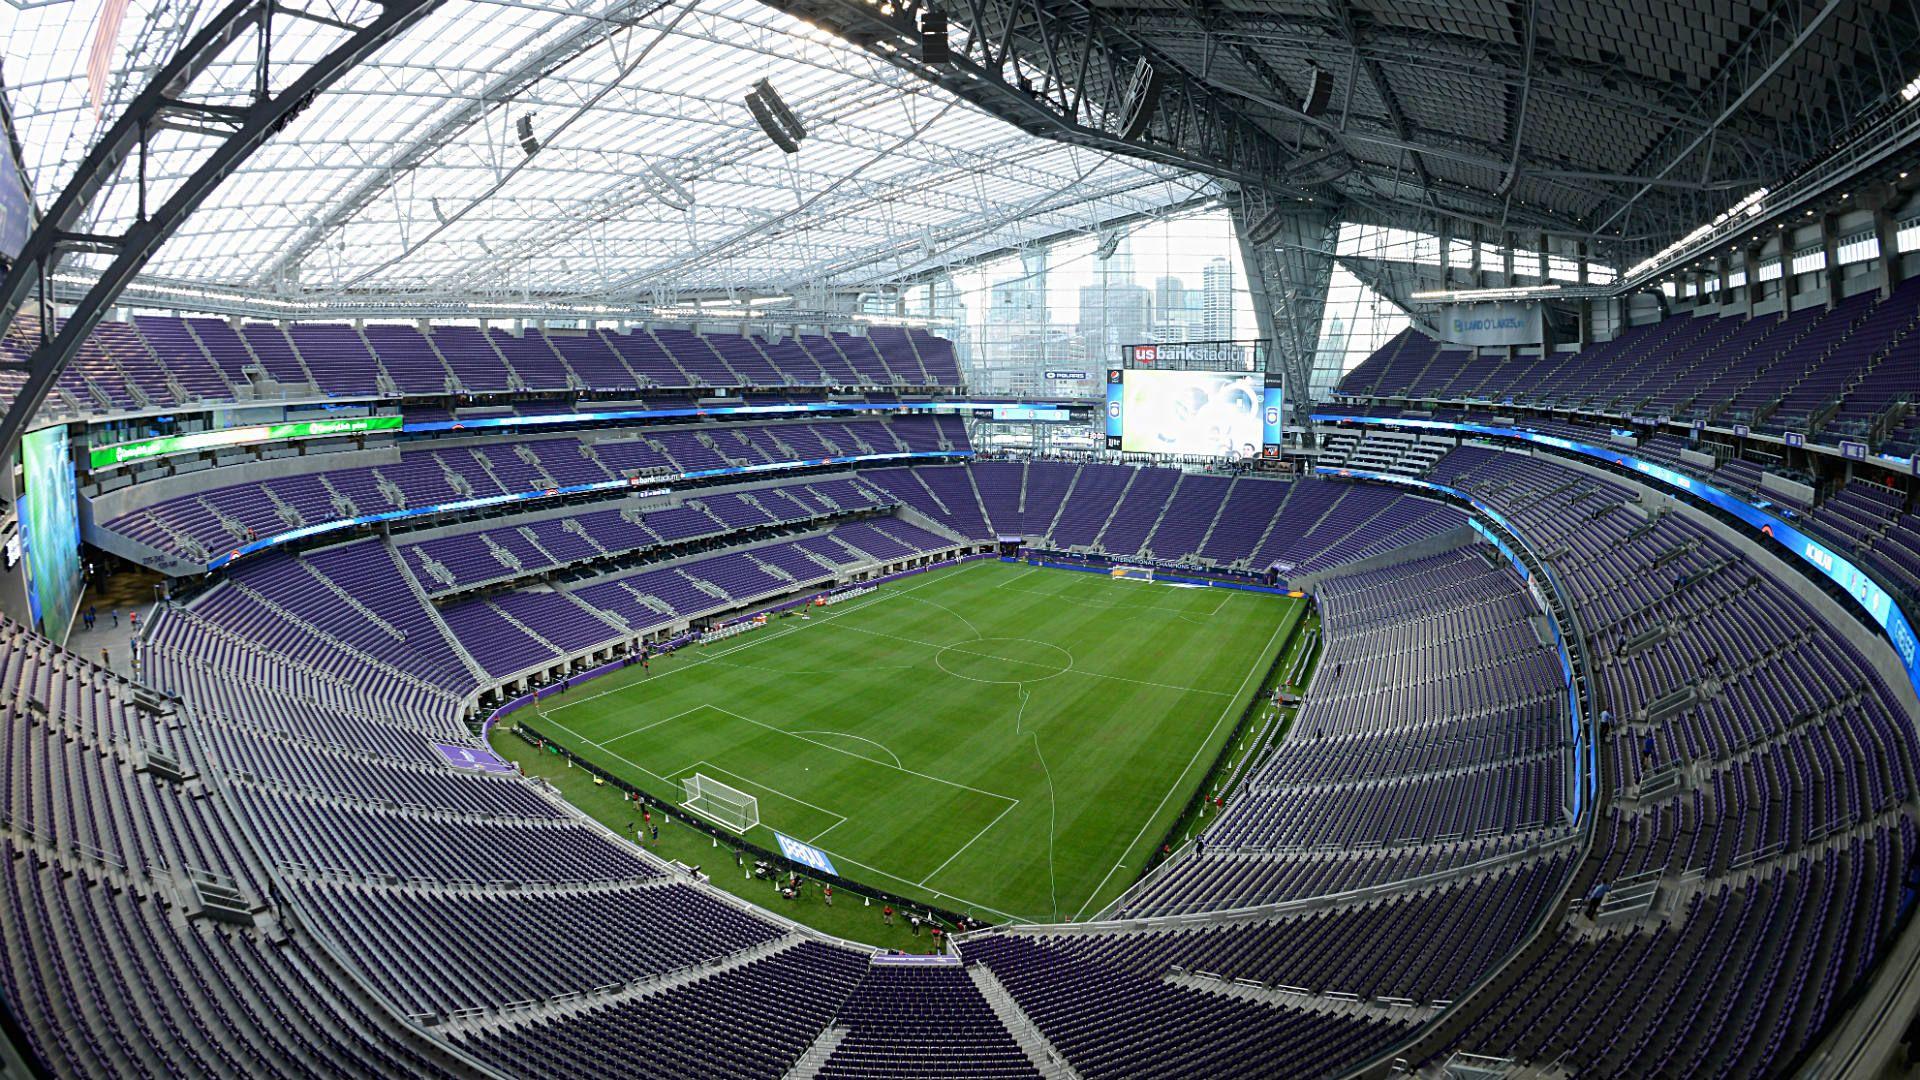 Vikings' U.S. Bank Stadium opens to mostly positive reviews. NFL